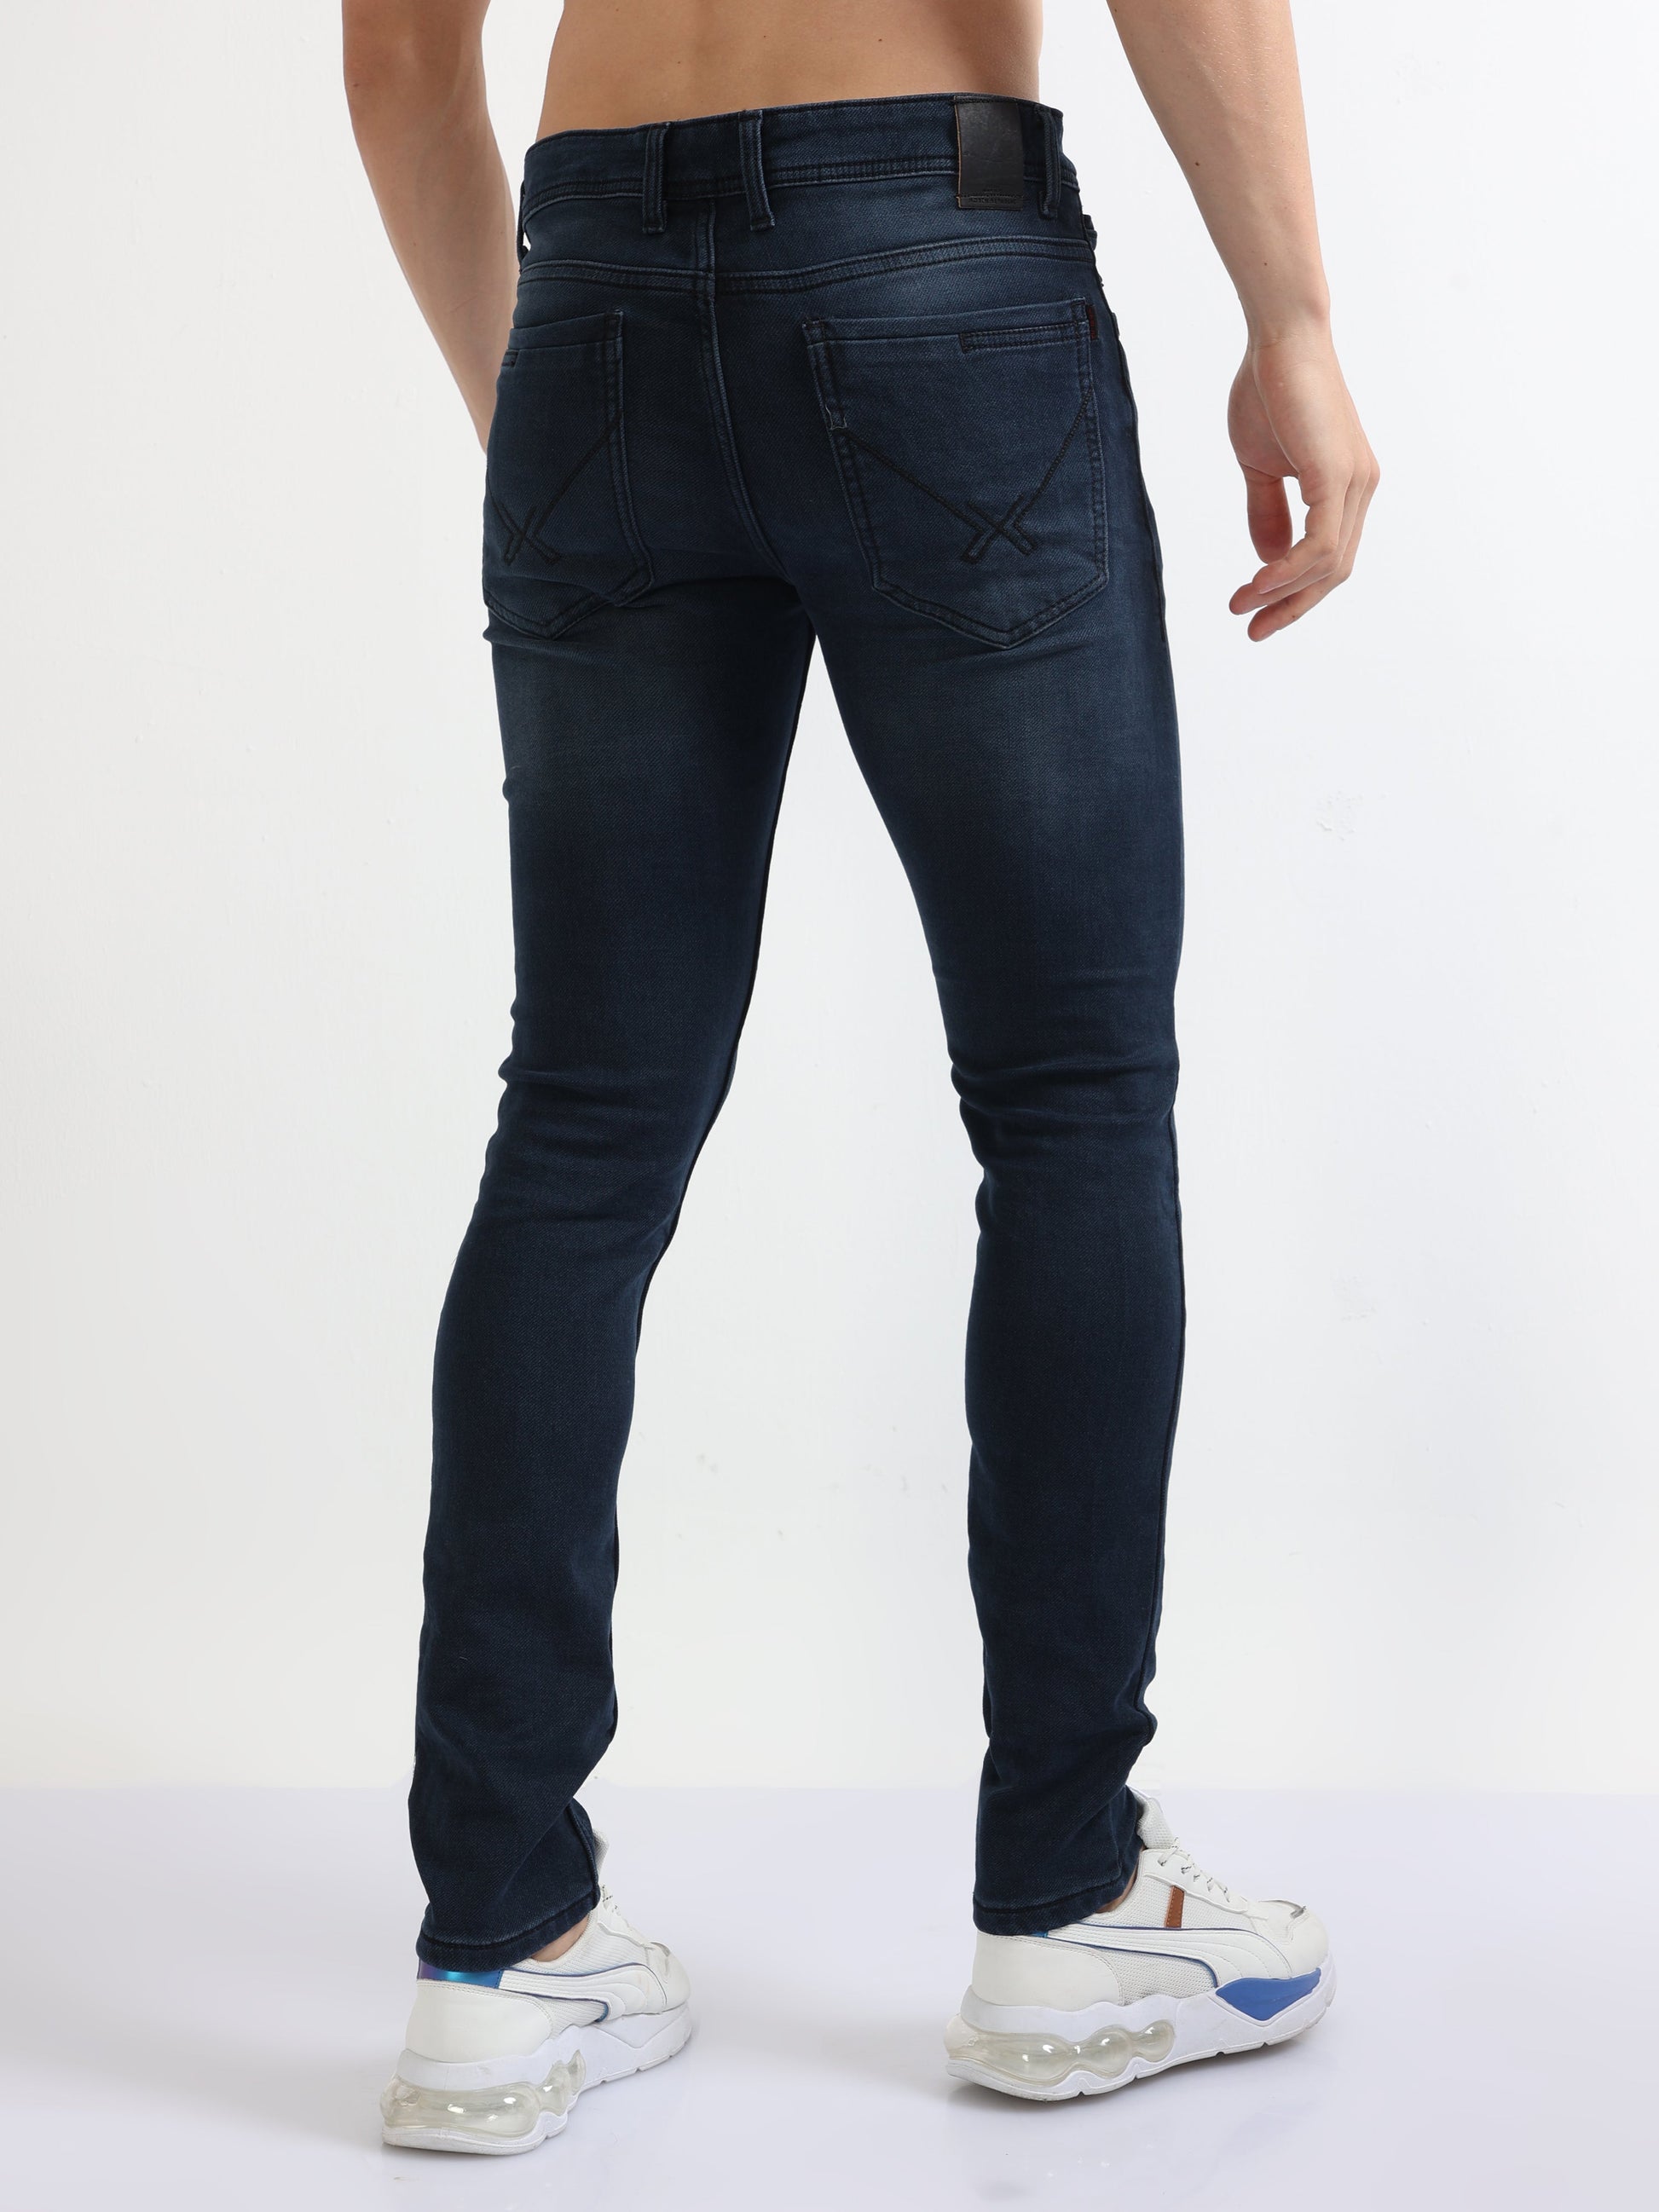 Buy Faded Wash Jeans Online.